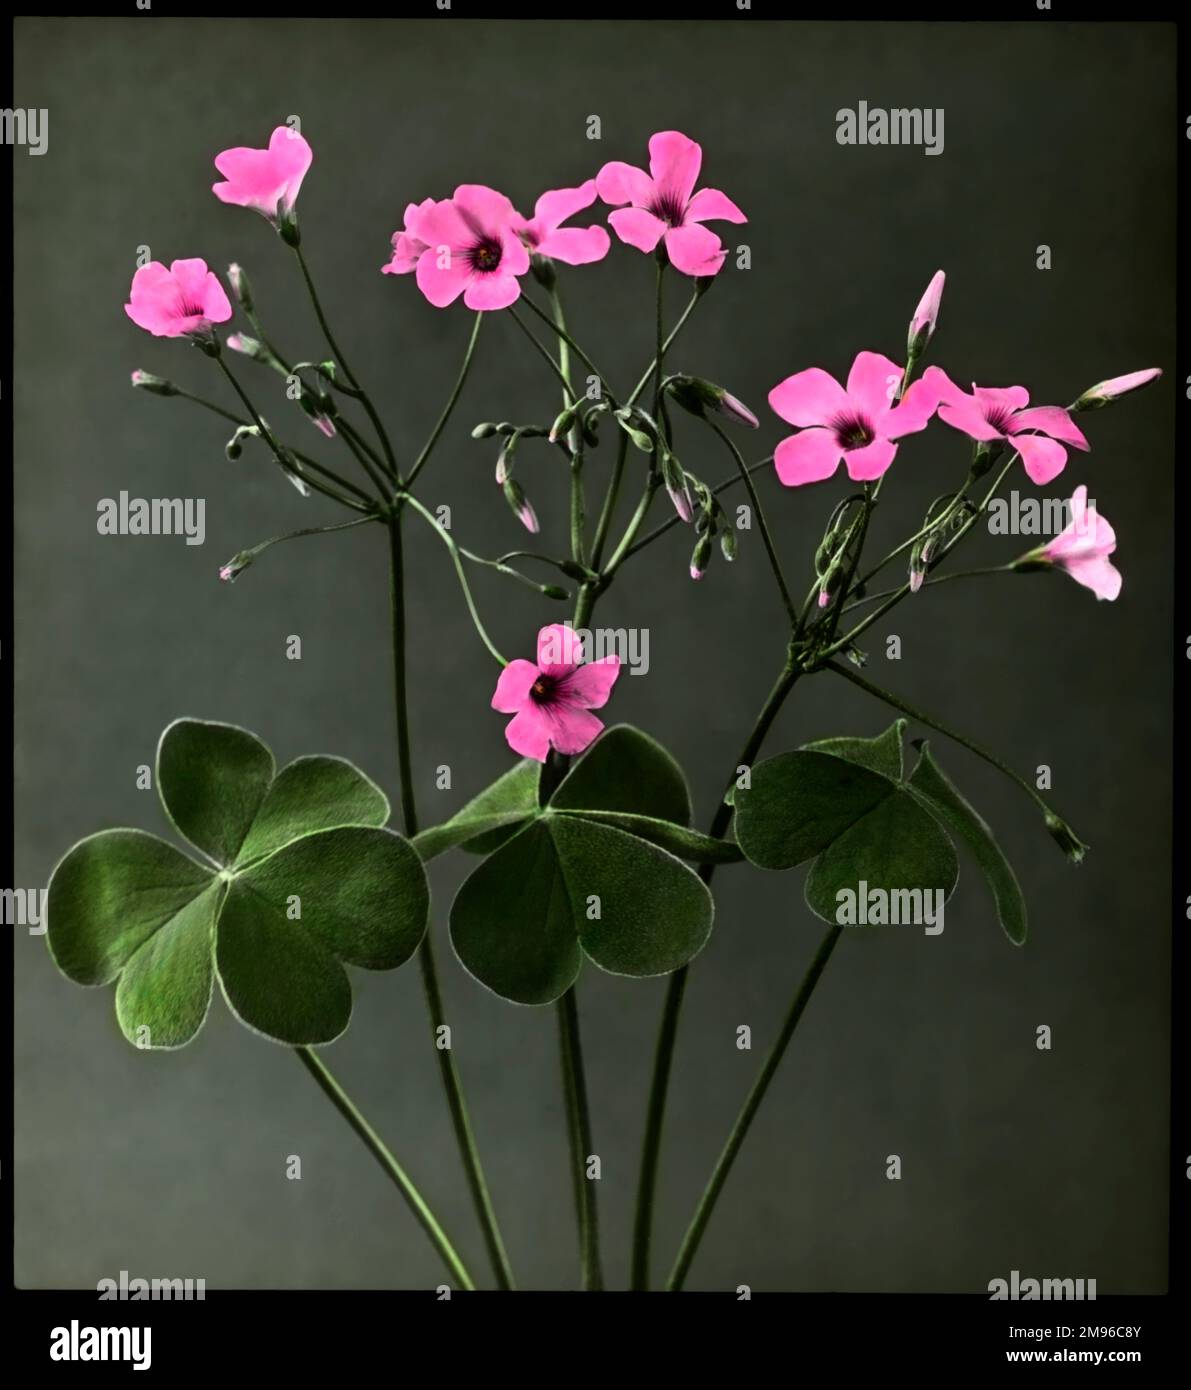 Oxalis Crassipes Rosea (Strawberry Oxalis, Wood Sorrel), a perennial flowering plant of the Oxalidaceae family, with rose-pink flowers.  Seen here in the daytime, with the flowers open. Stock Photo